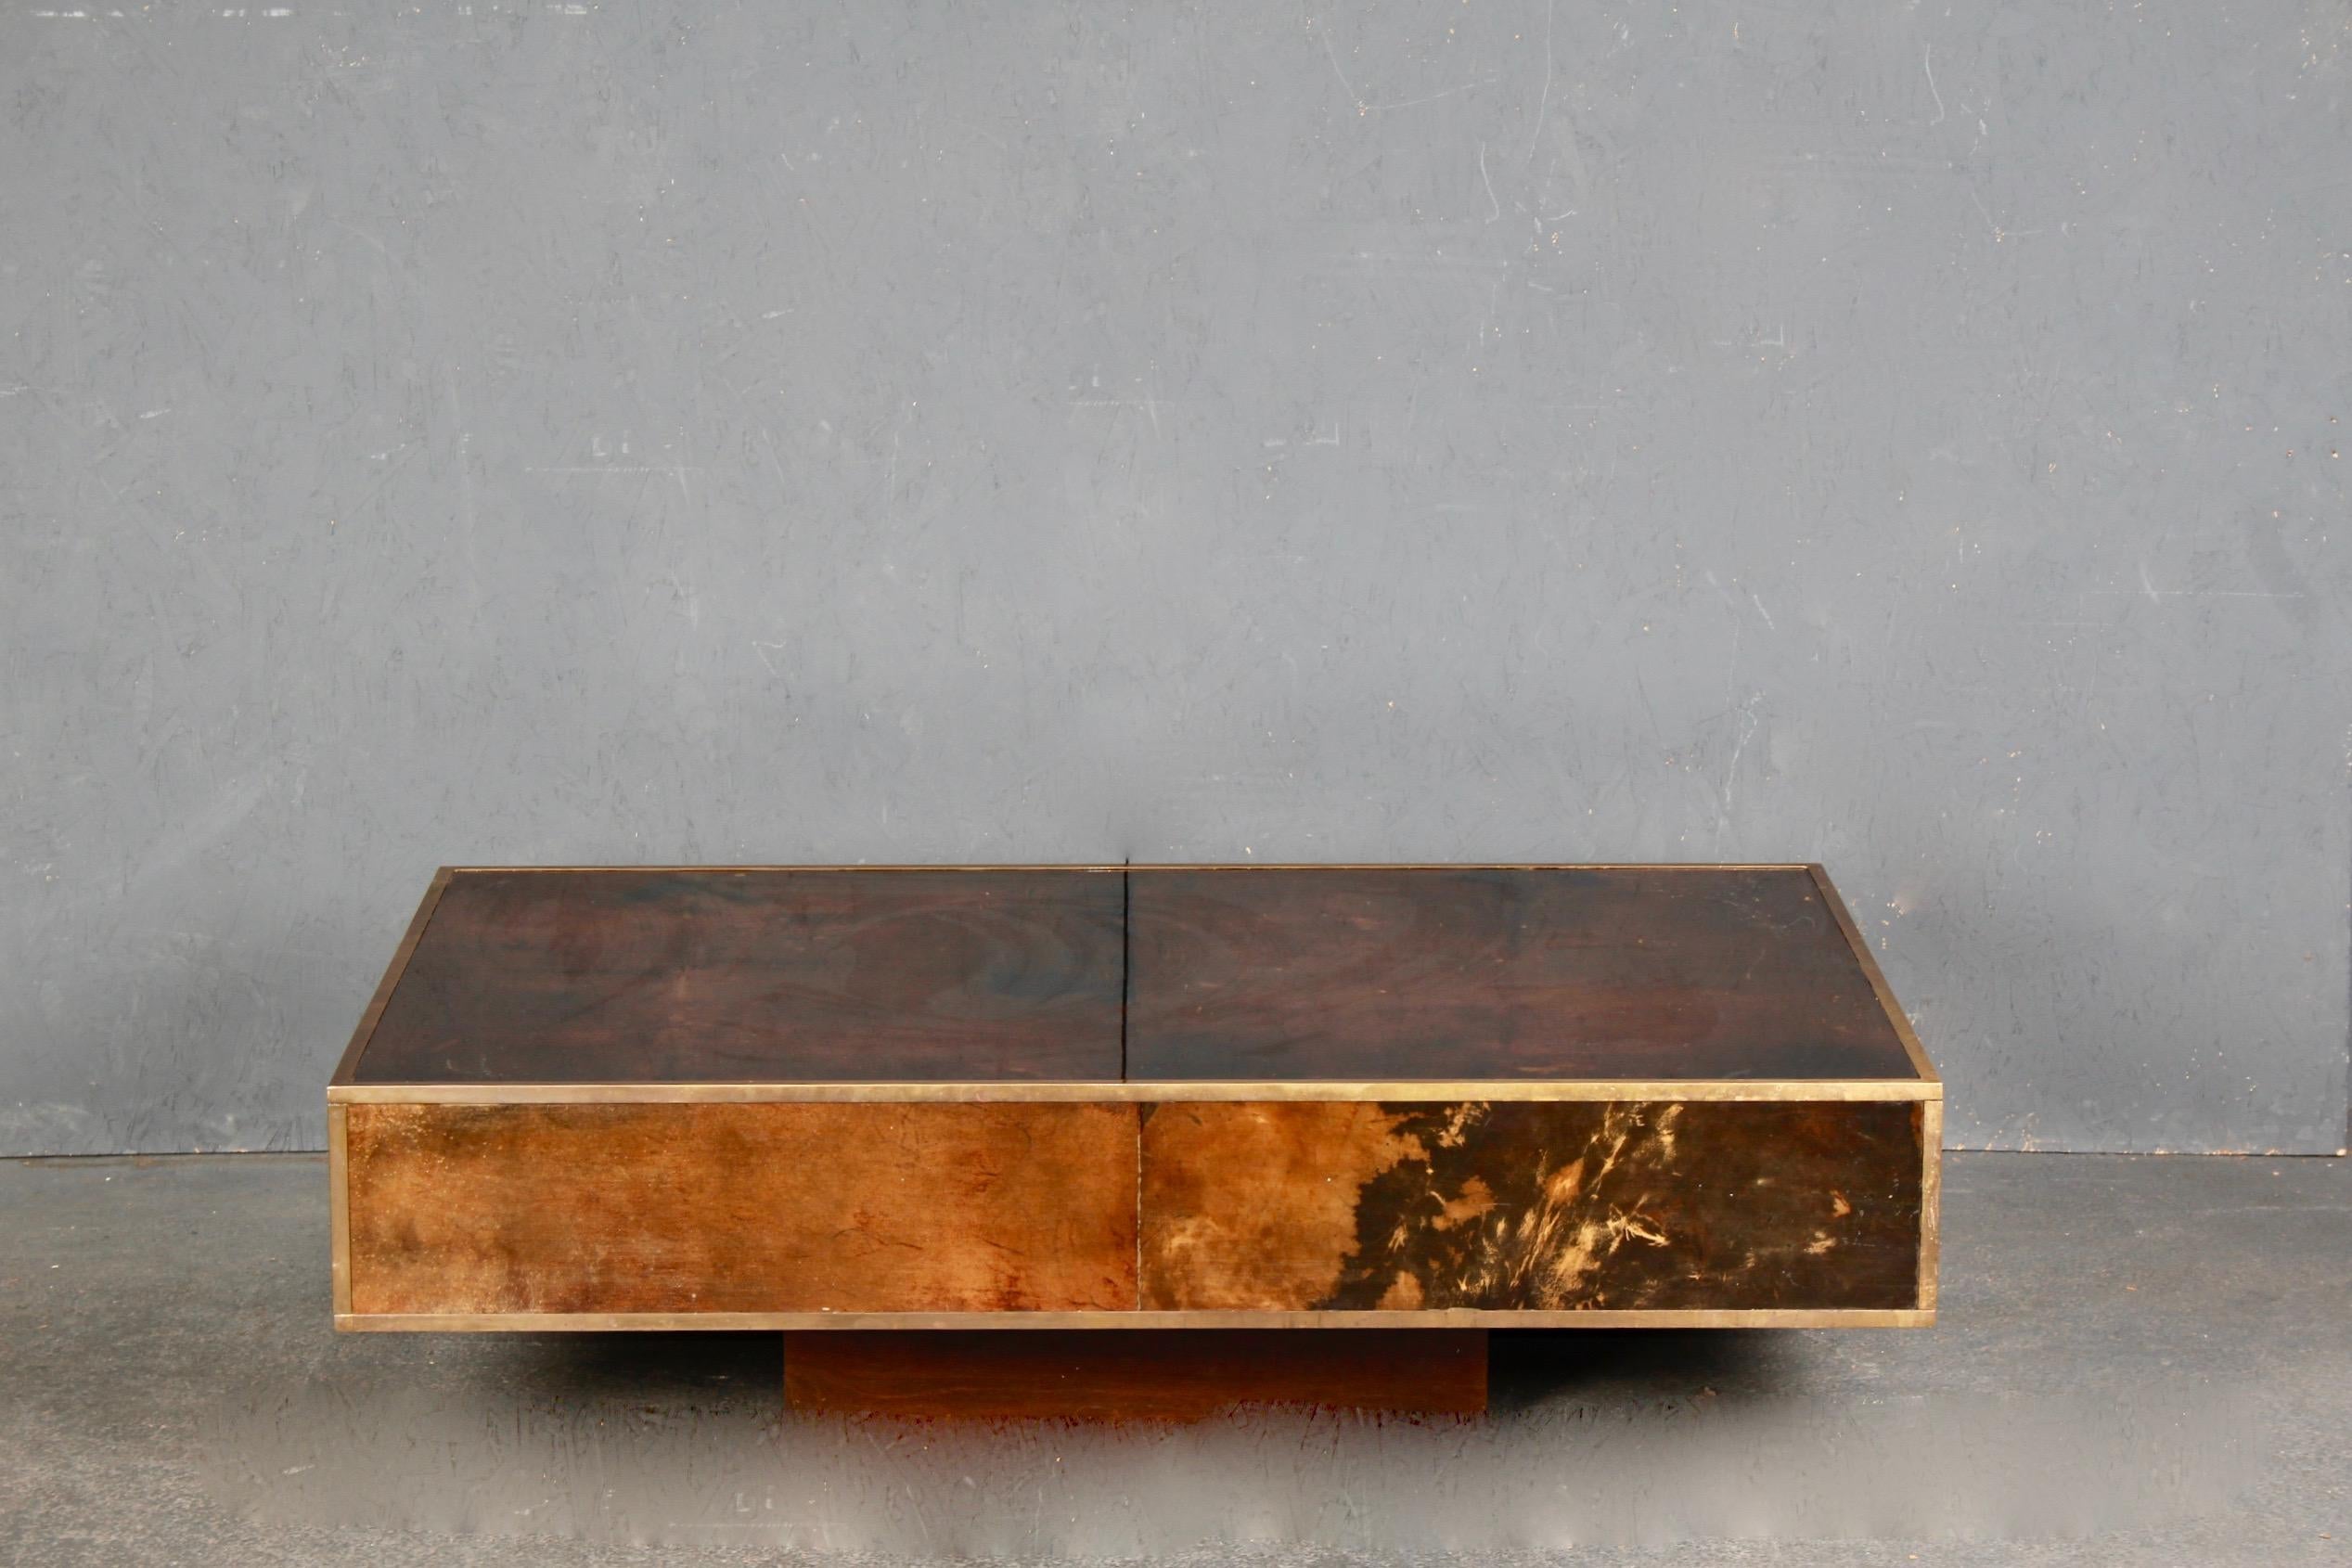 Aldo Tura parchment coffee table , there are two small lacks of varnish on the top of the table